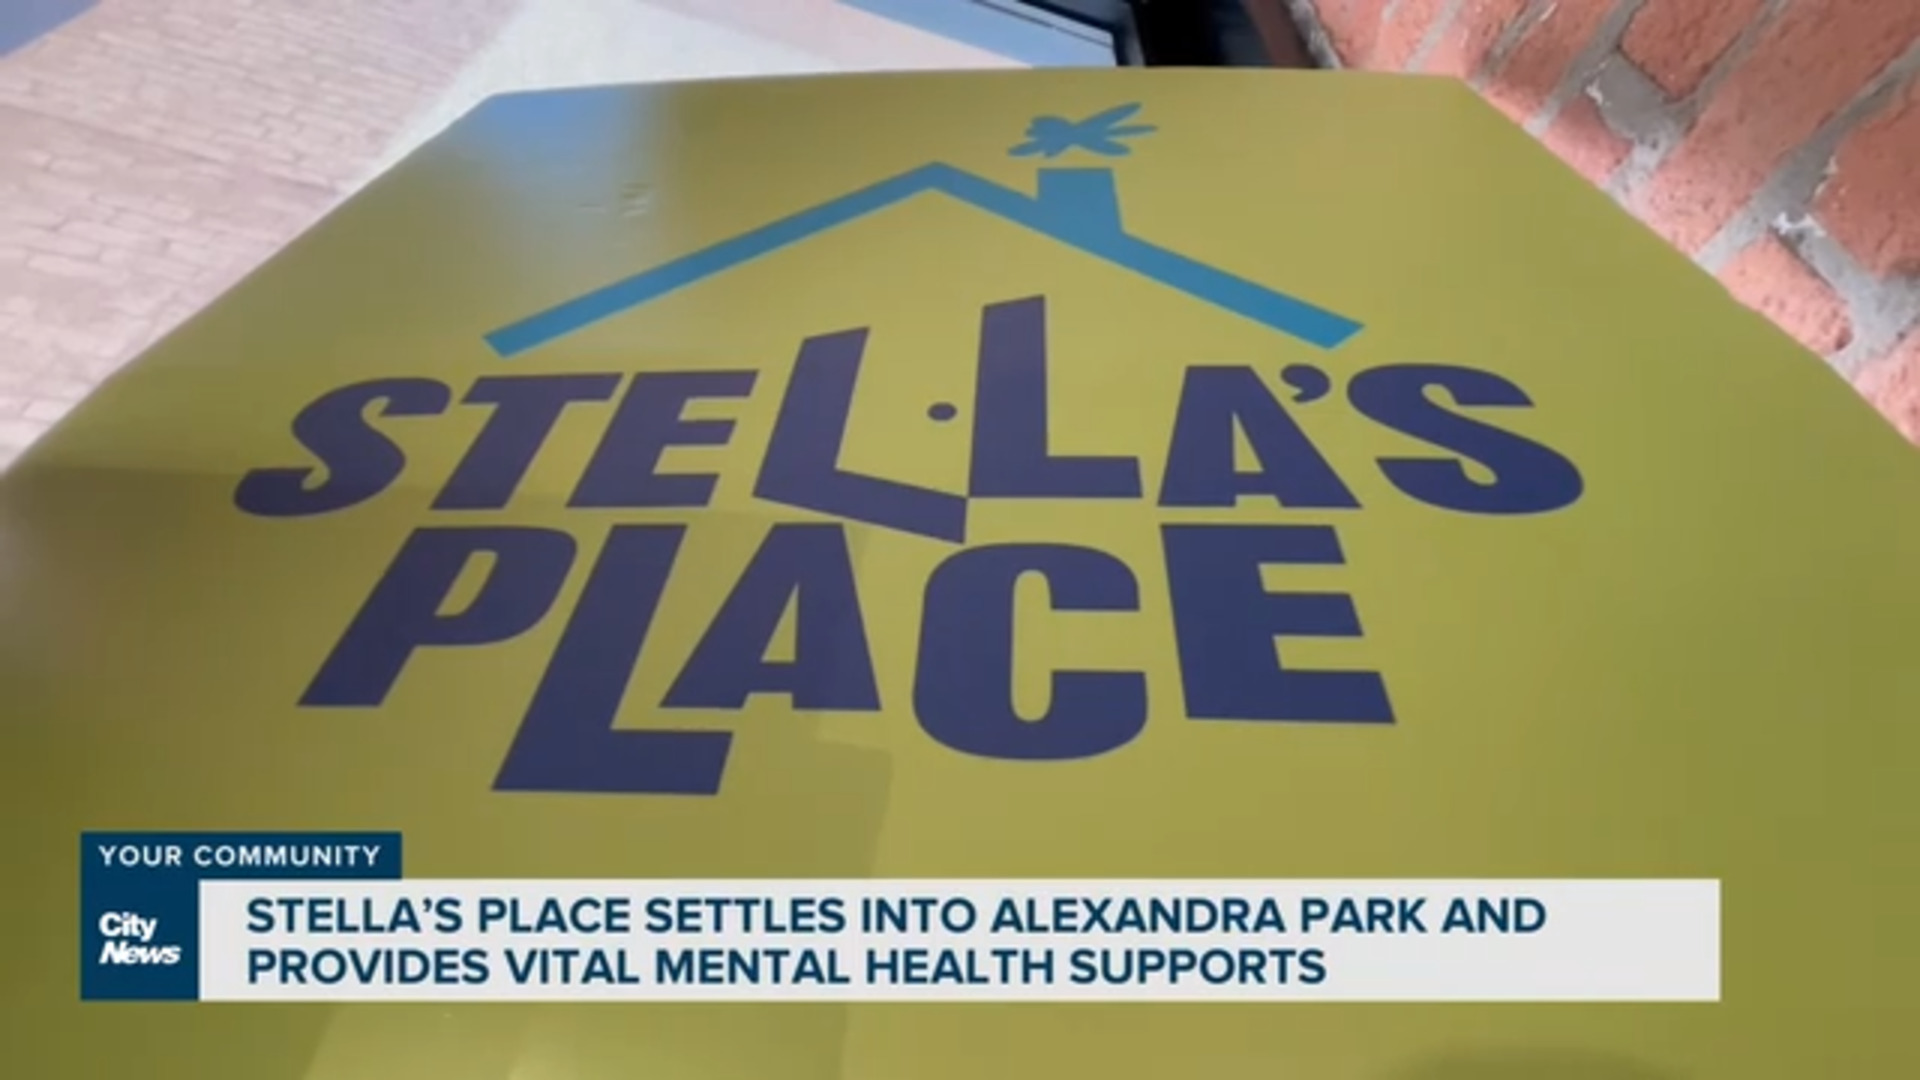 Stella's Place provides mental health supports to youth, young adults